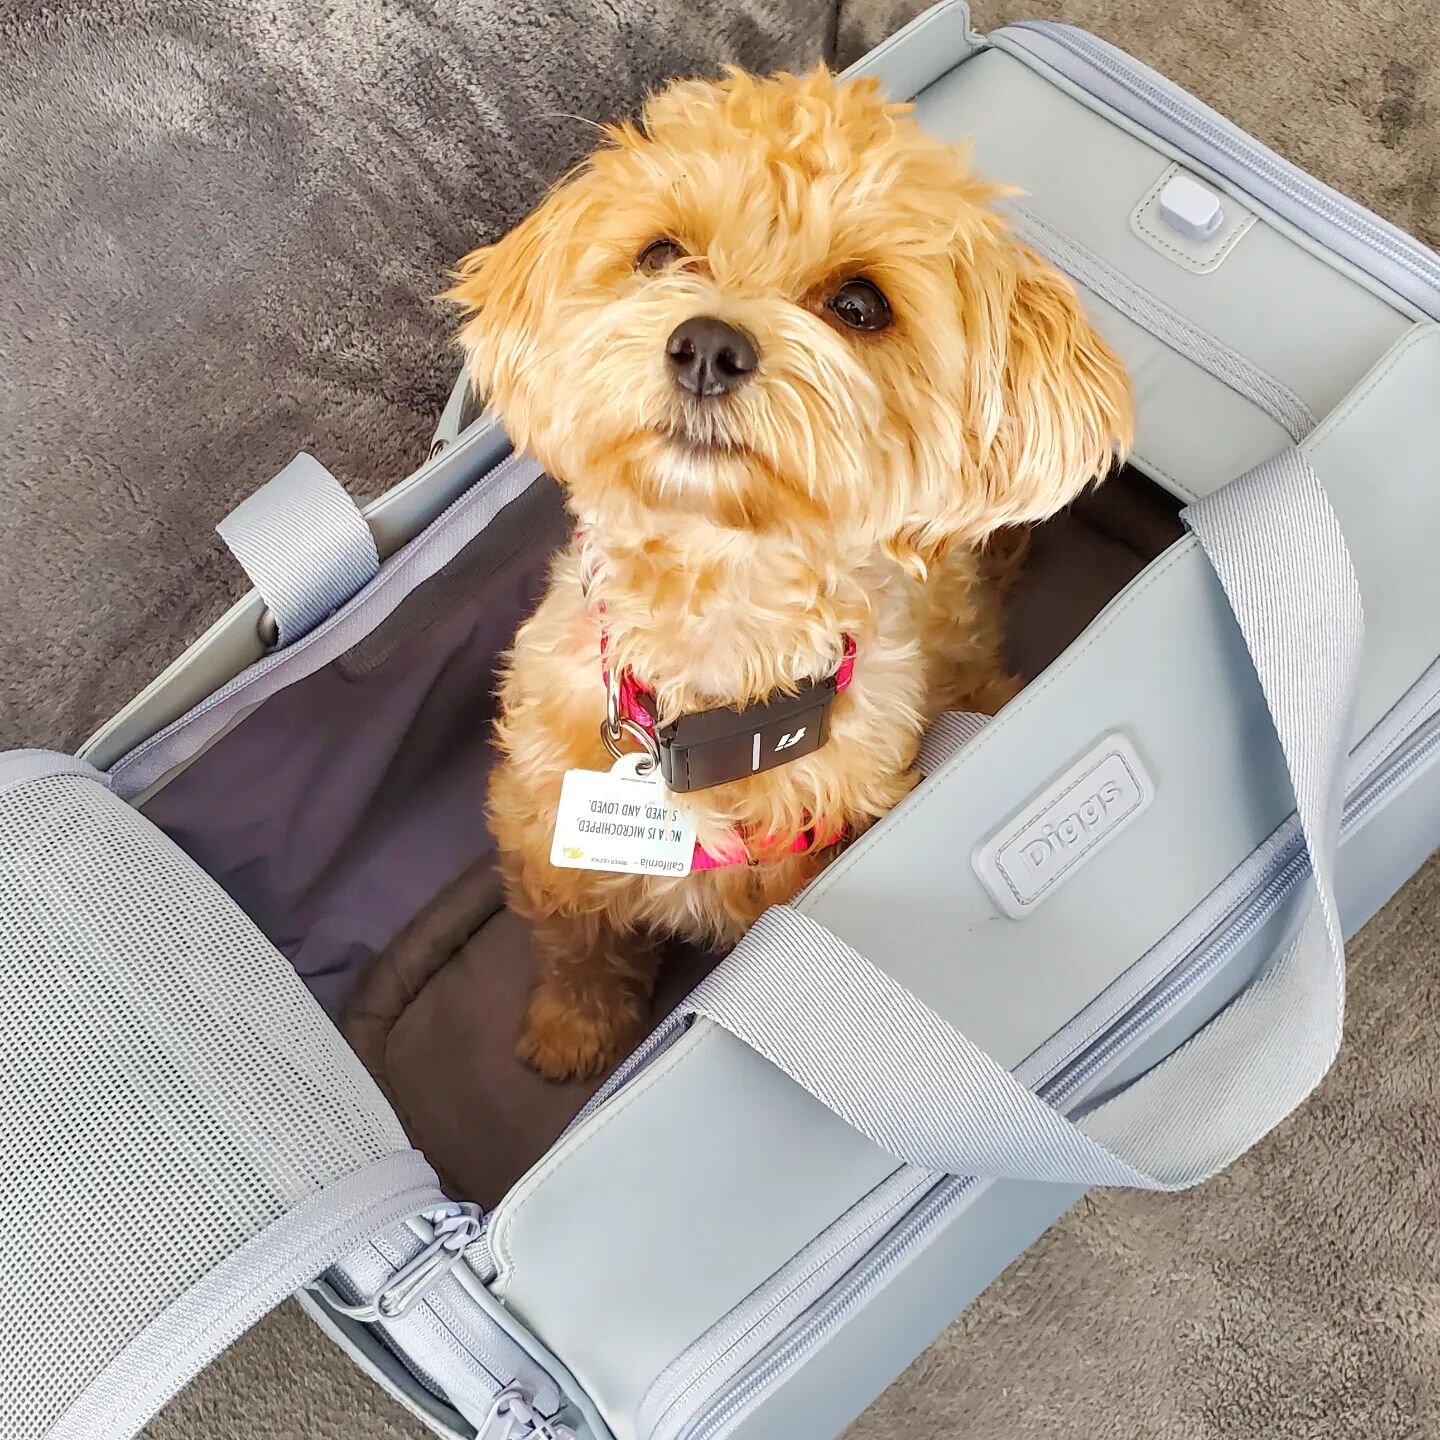 teaching nola to love her carrier! the diggs carrier is one of the carriers independently crash tested certified by the center for pet safety to keep your pet safe in the car. 🚗

#dogtraining101 #dogtraininglosangeles #dogtrainingtips #losangelesdog